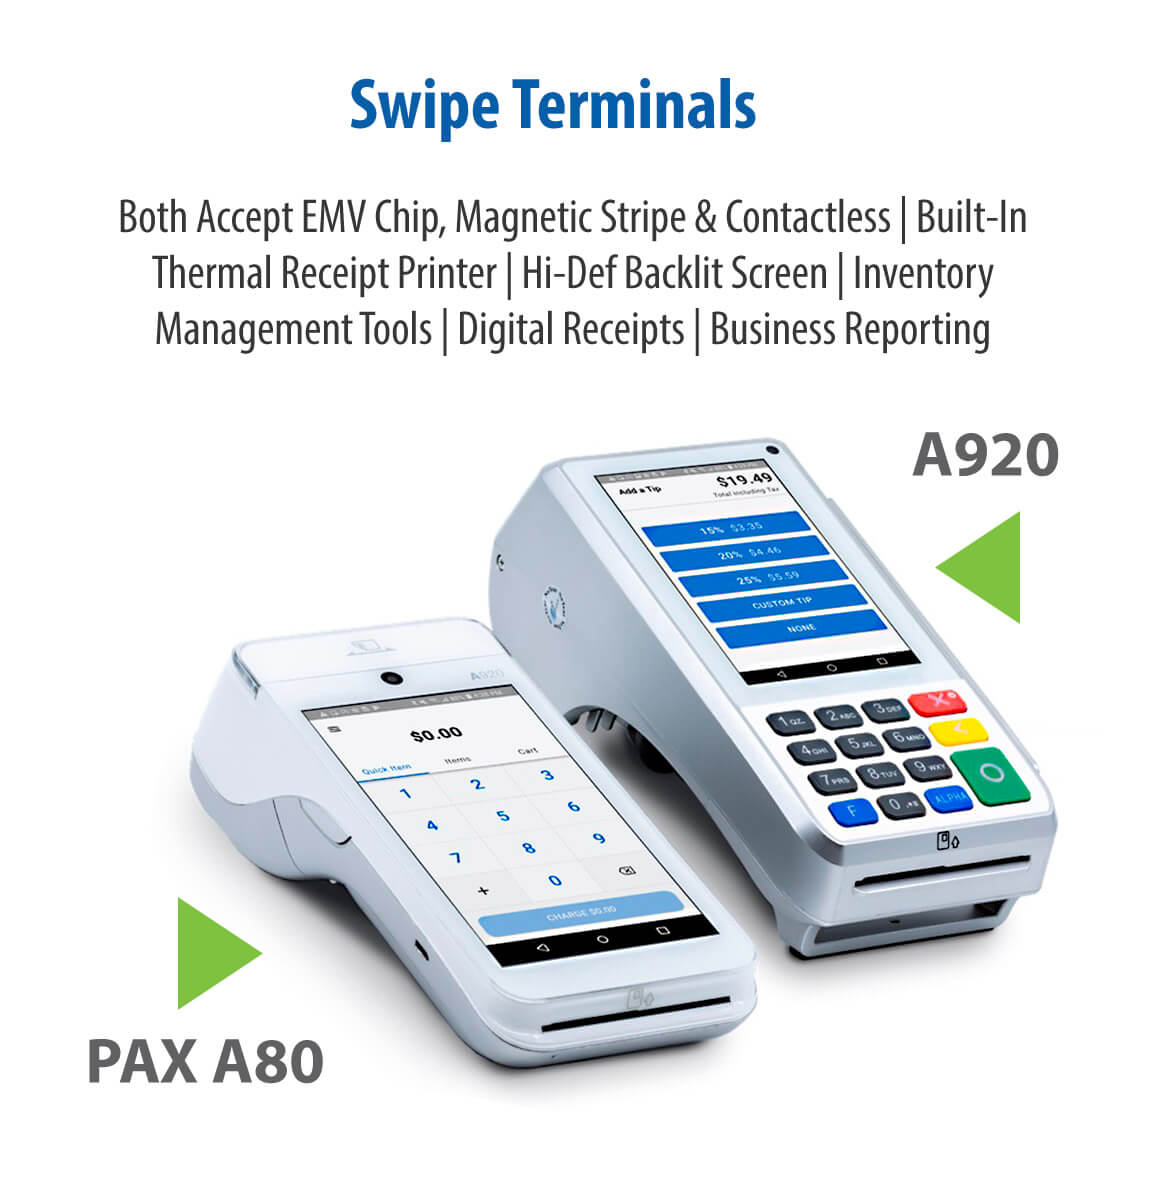 A920 & PAX A80 Both Accept EMV Chip, Magnetic Stripe & Contactless | Built-In